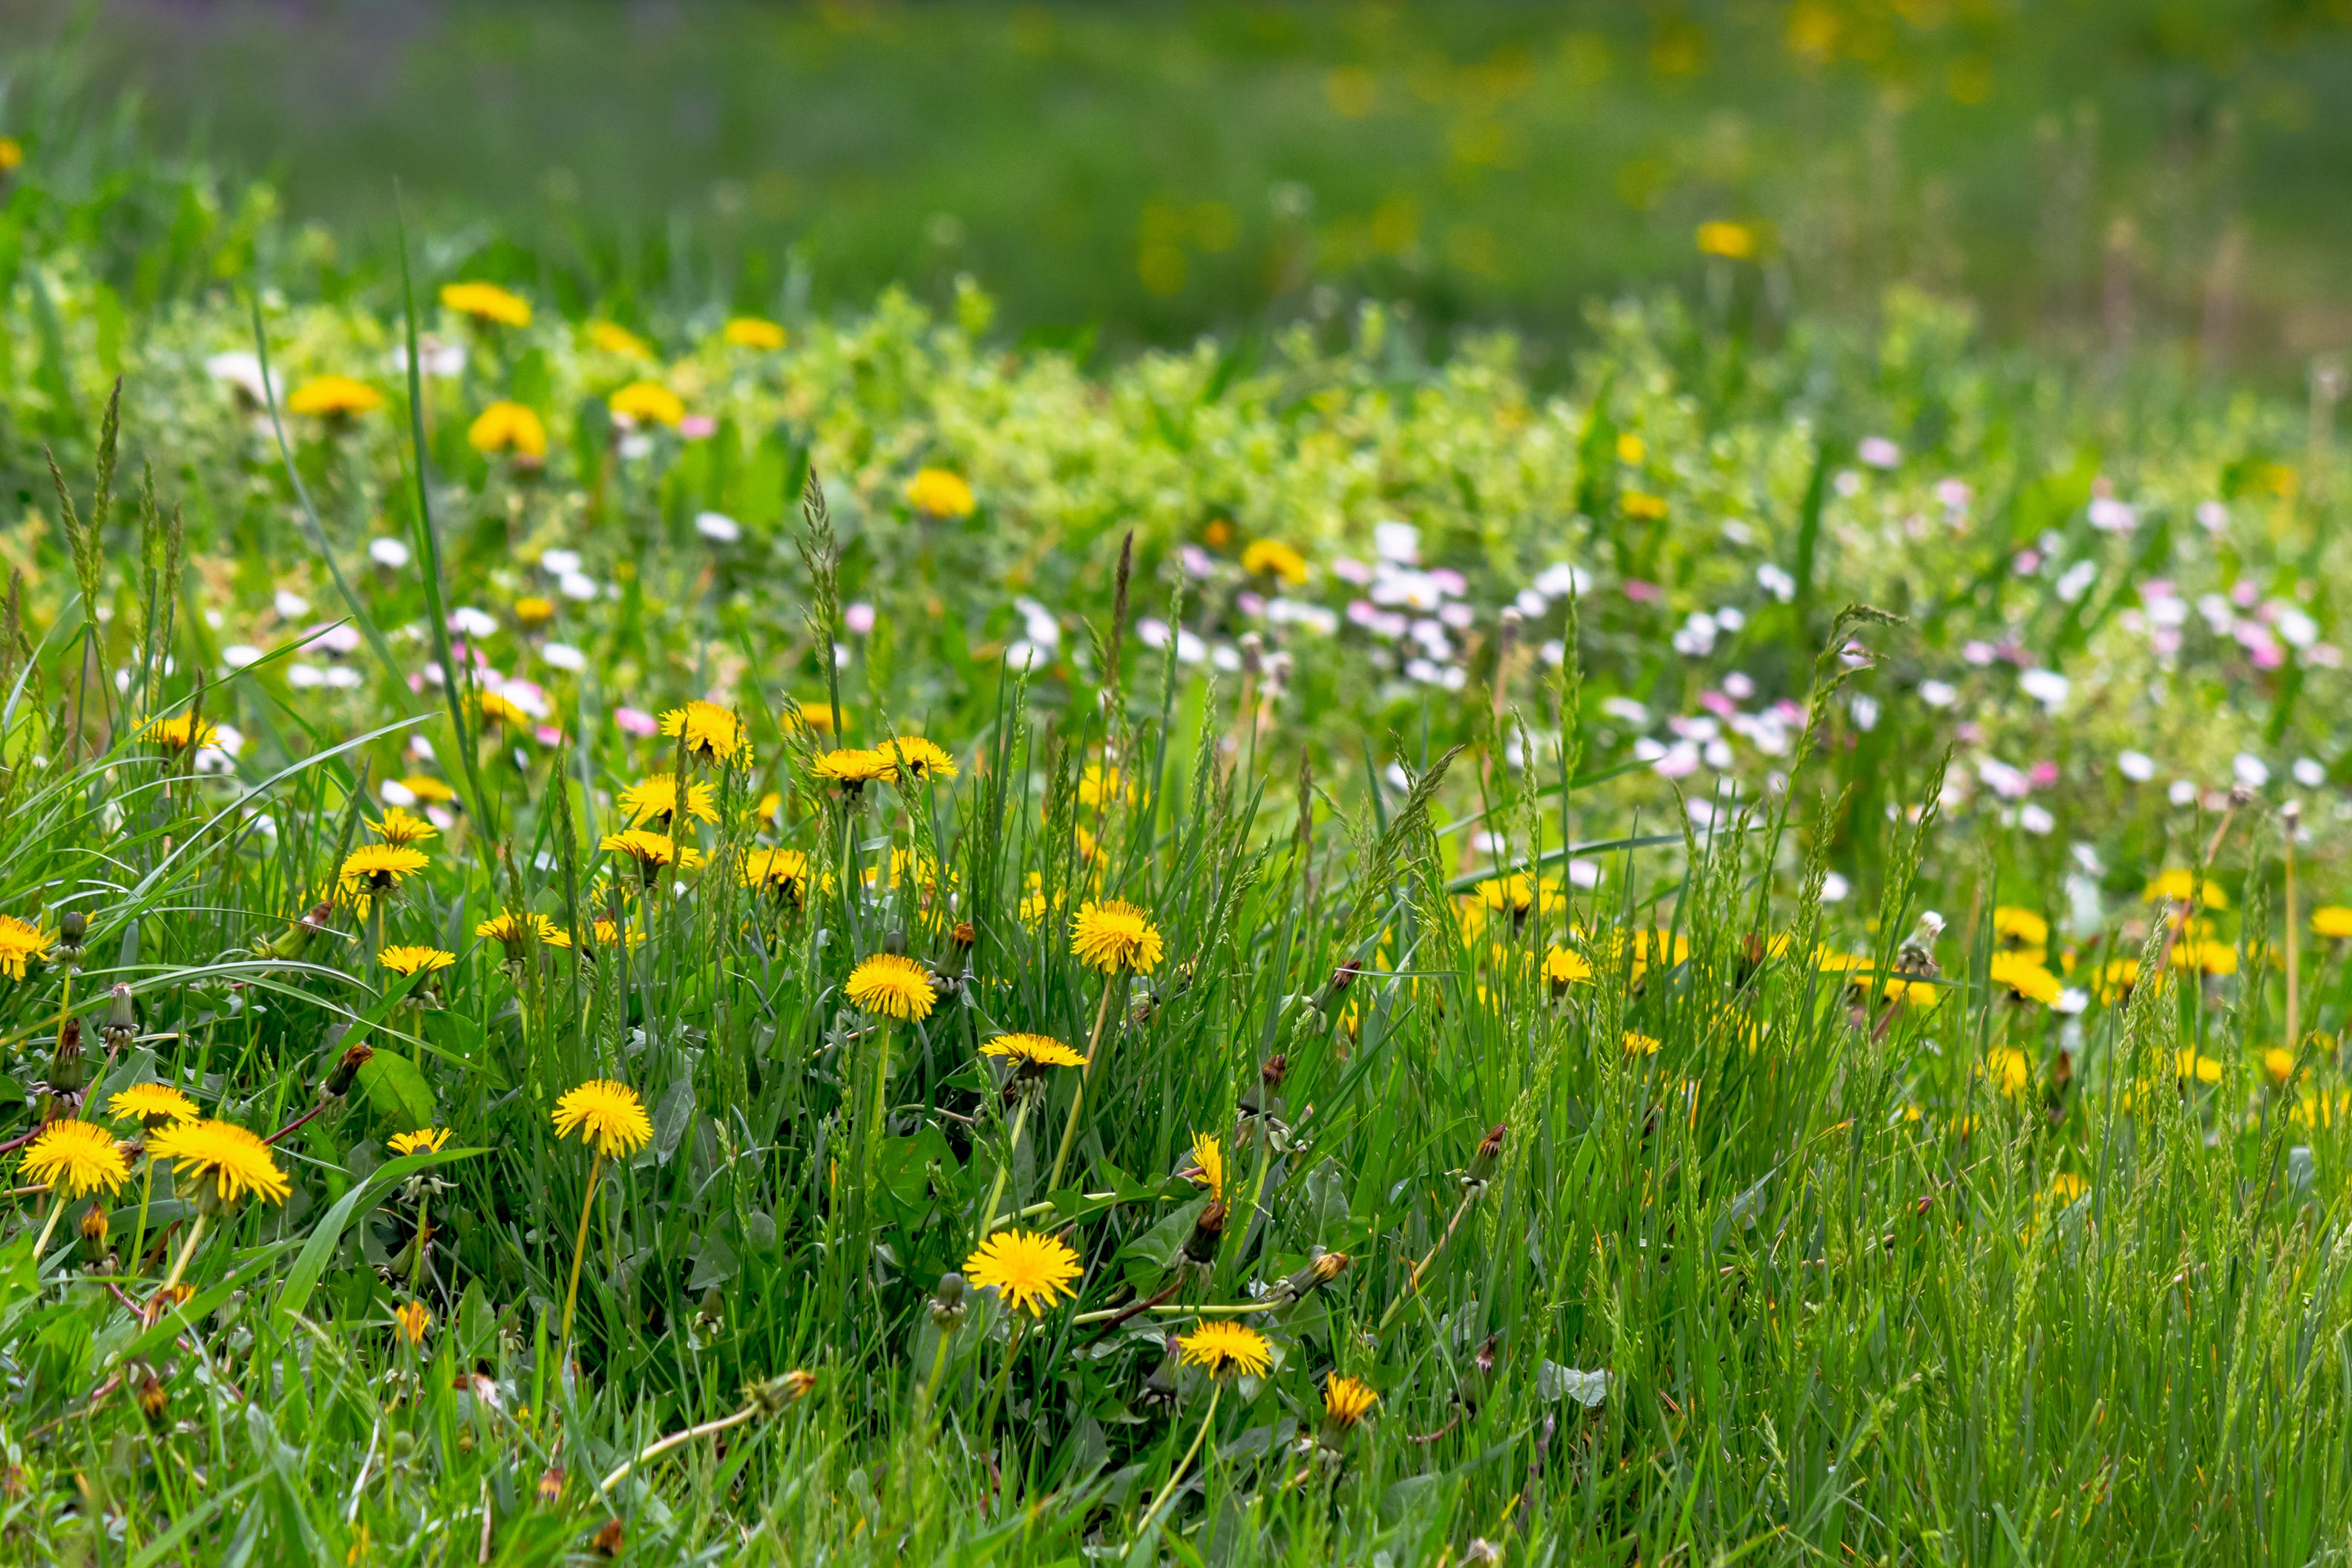 Long grass with dandelions and other flowers in a garden